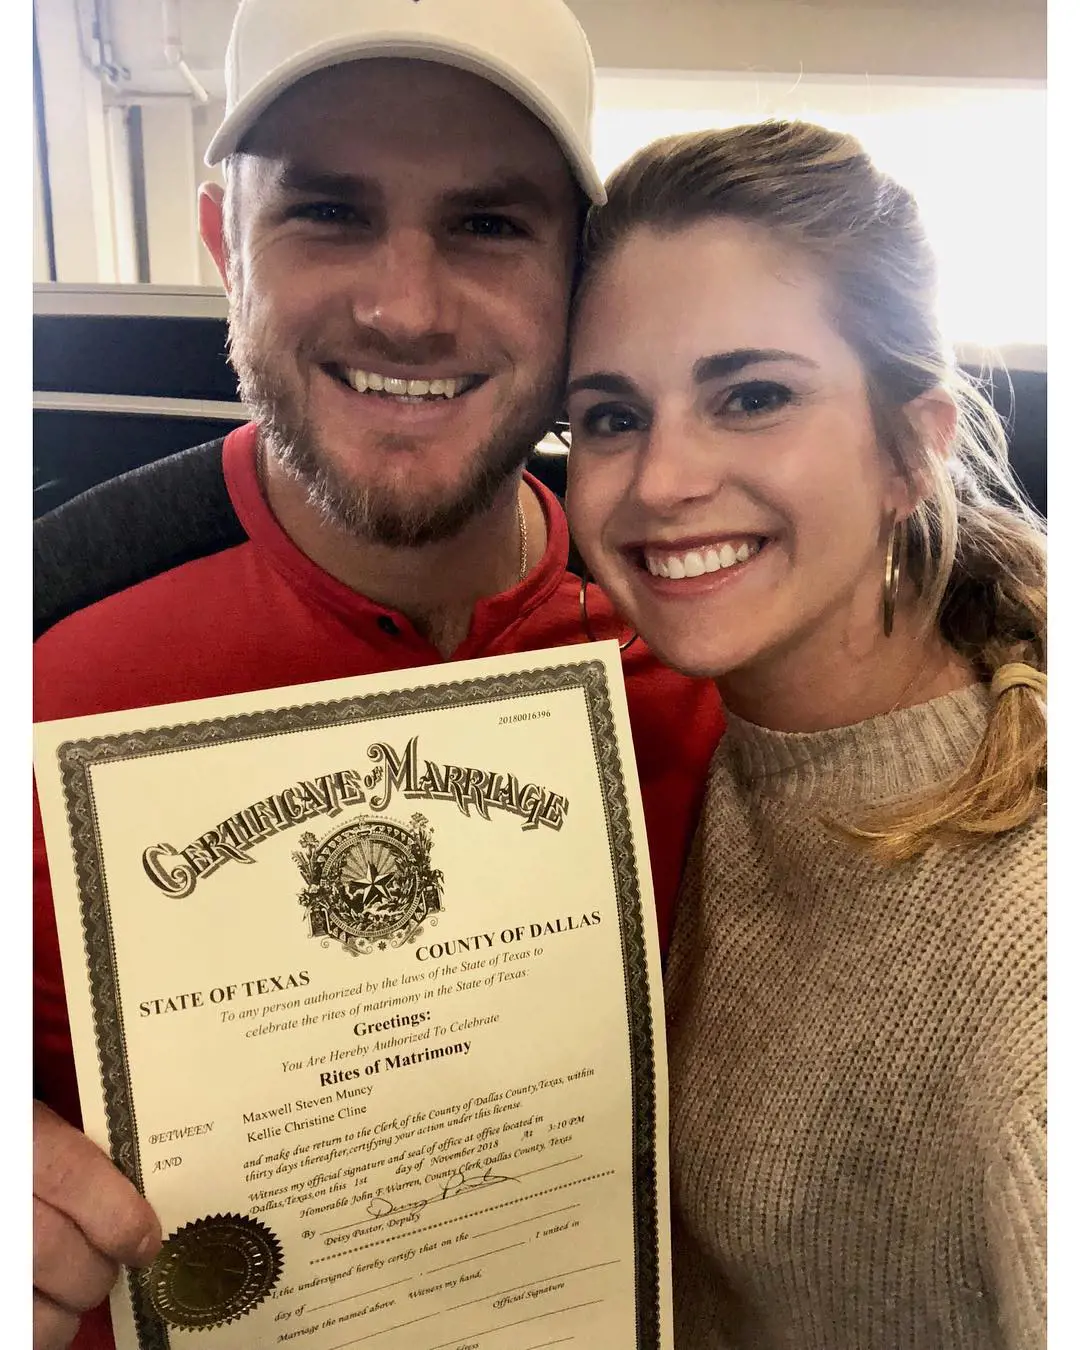 Kellie and Max holding their marriage license on November 2, 2018